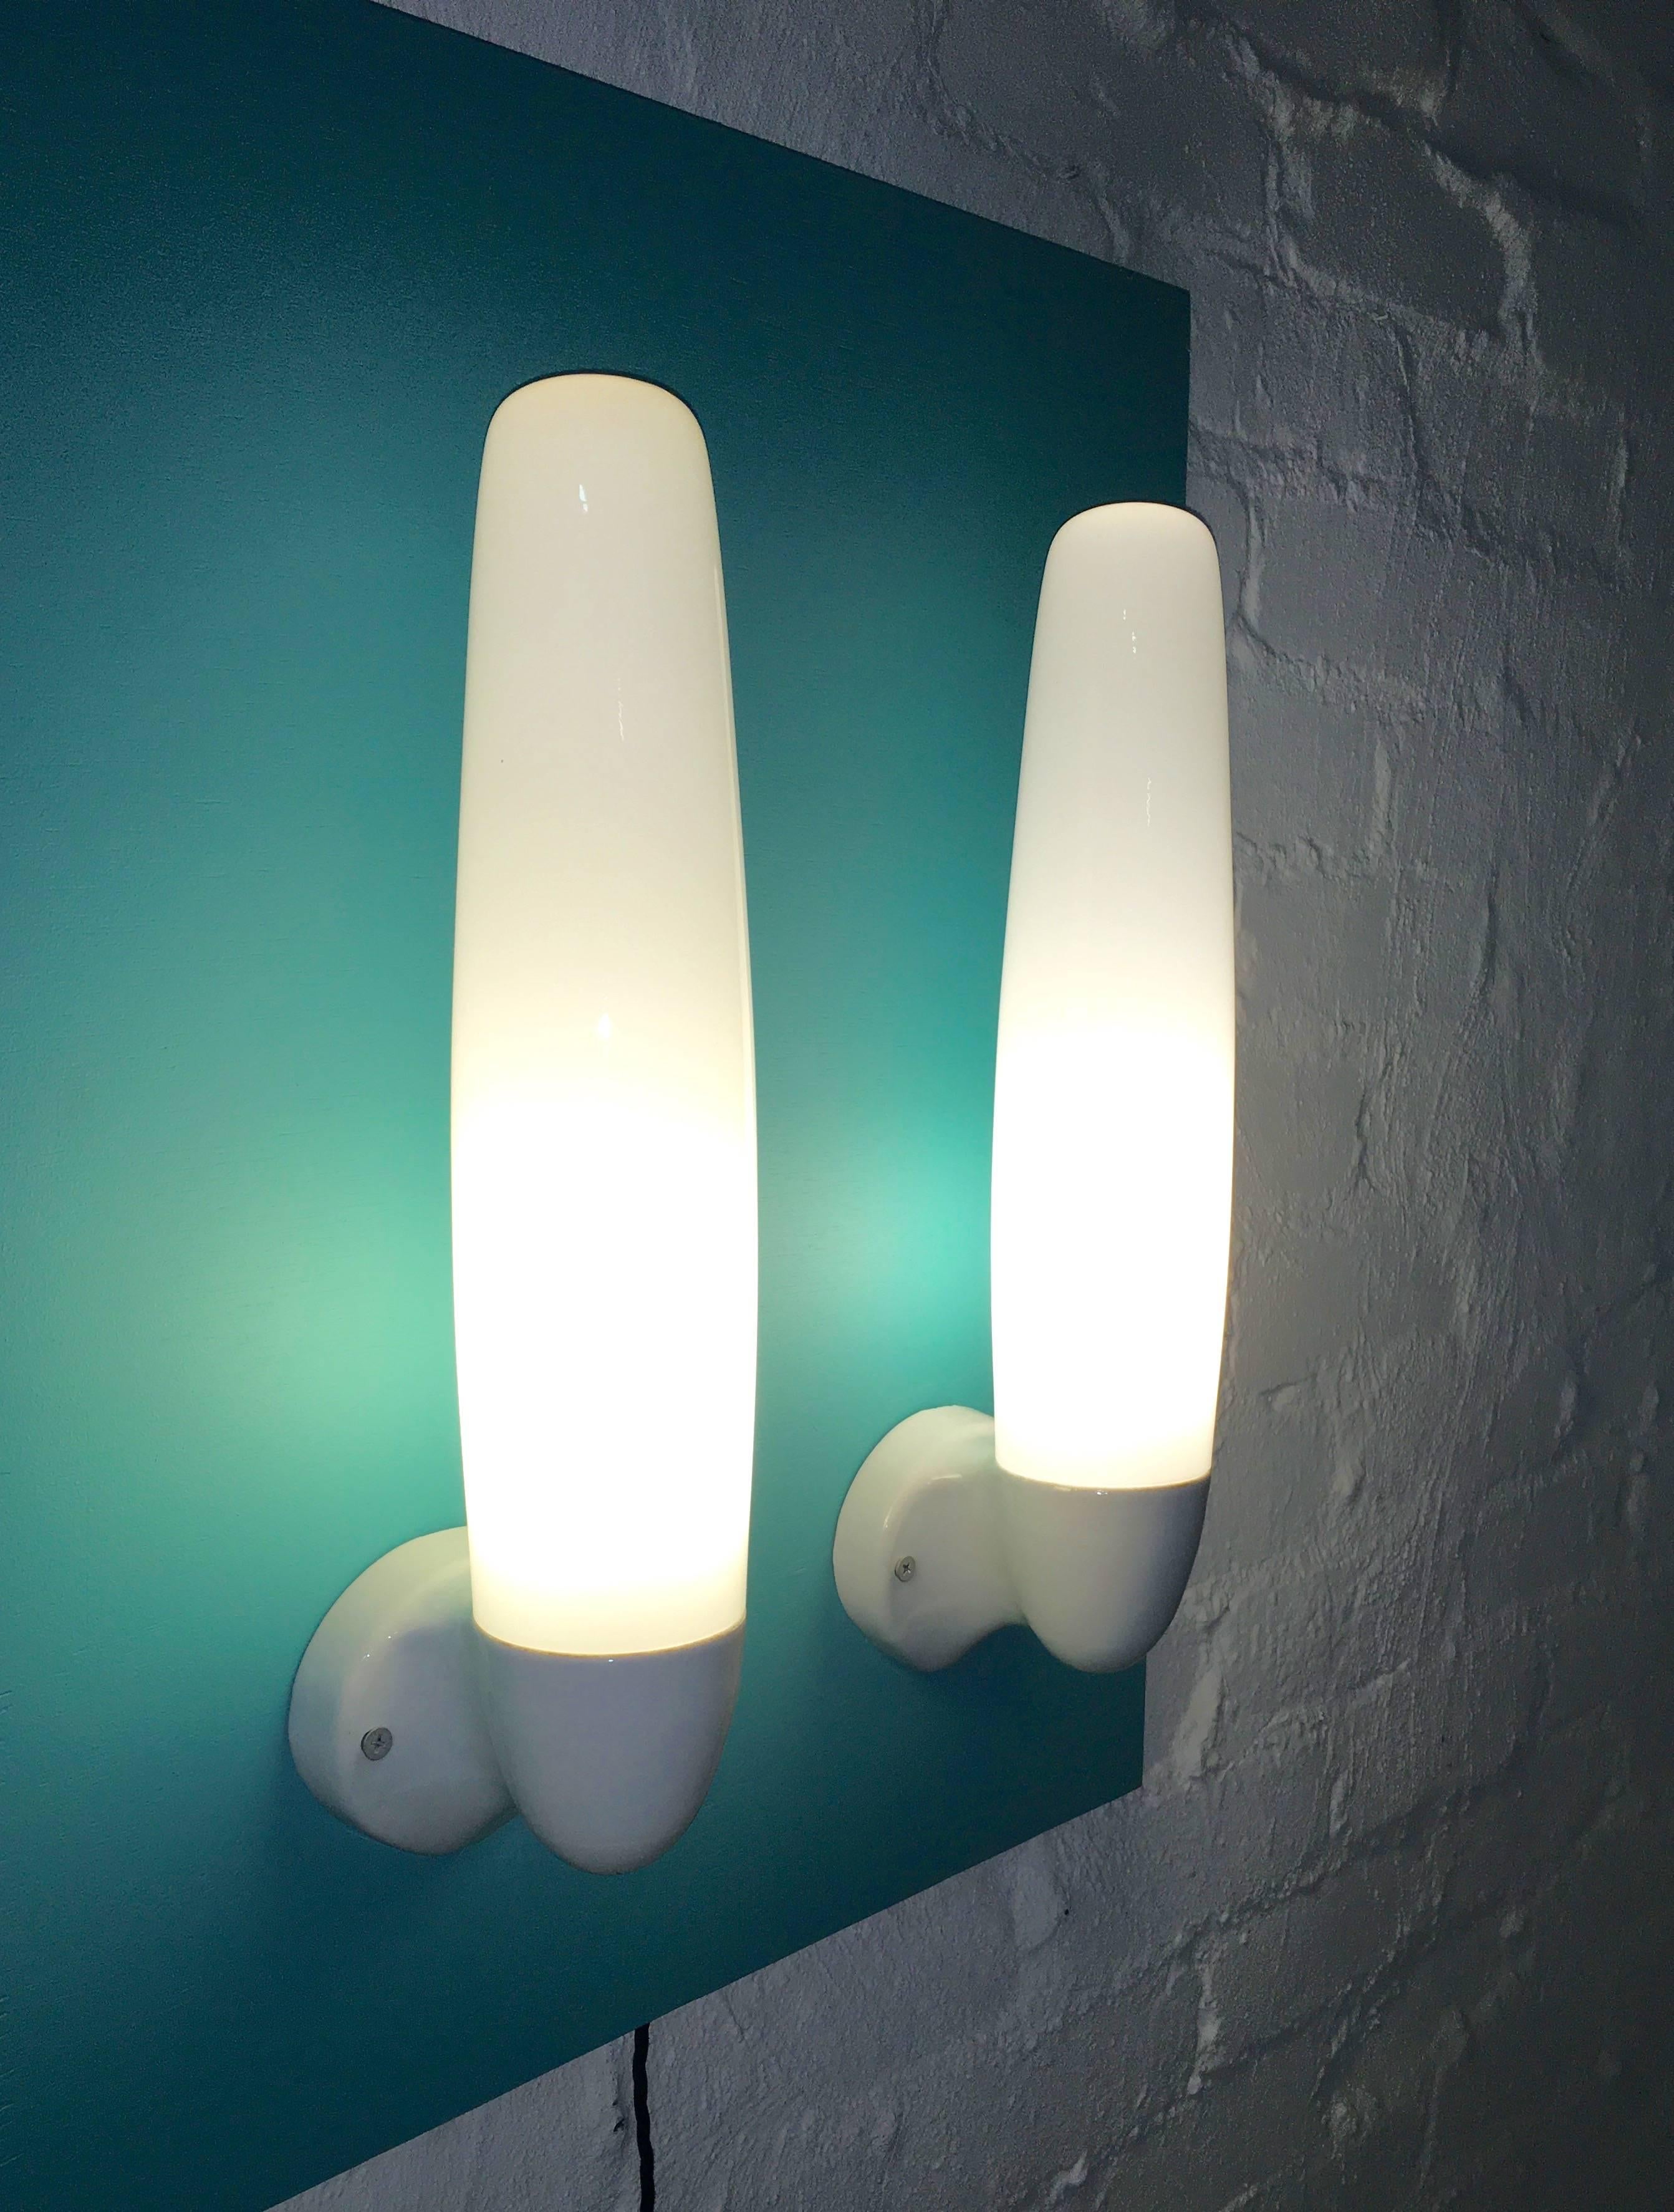 Fabulous prize winning wall lights designed in 1955 by Wilhelm Wagenfeld for Lindner Leuchten, Bamberg, Germany. 

Porcelain fixture and fittings with tall milk glass shade and threaded closure. One in perfect condition, one with small nibbles on